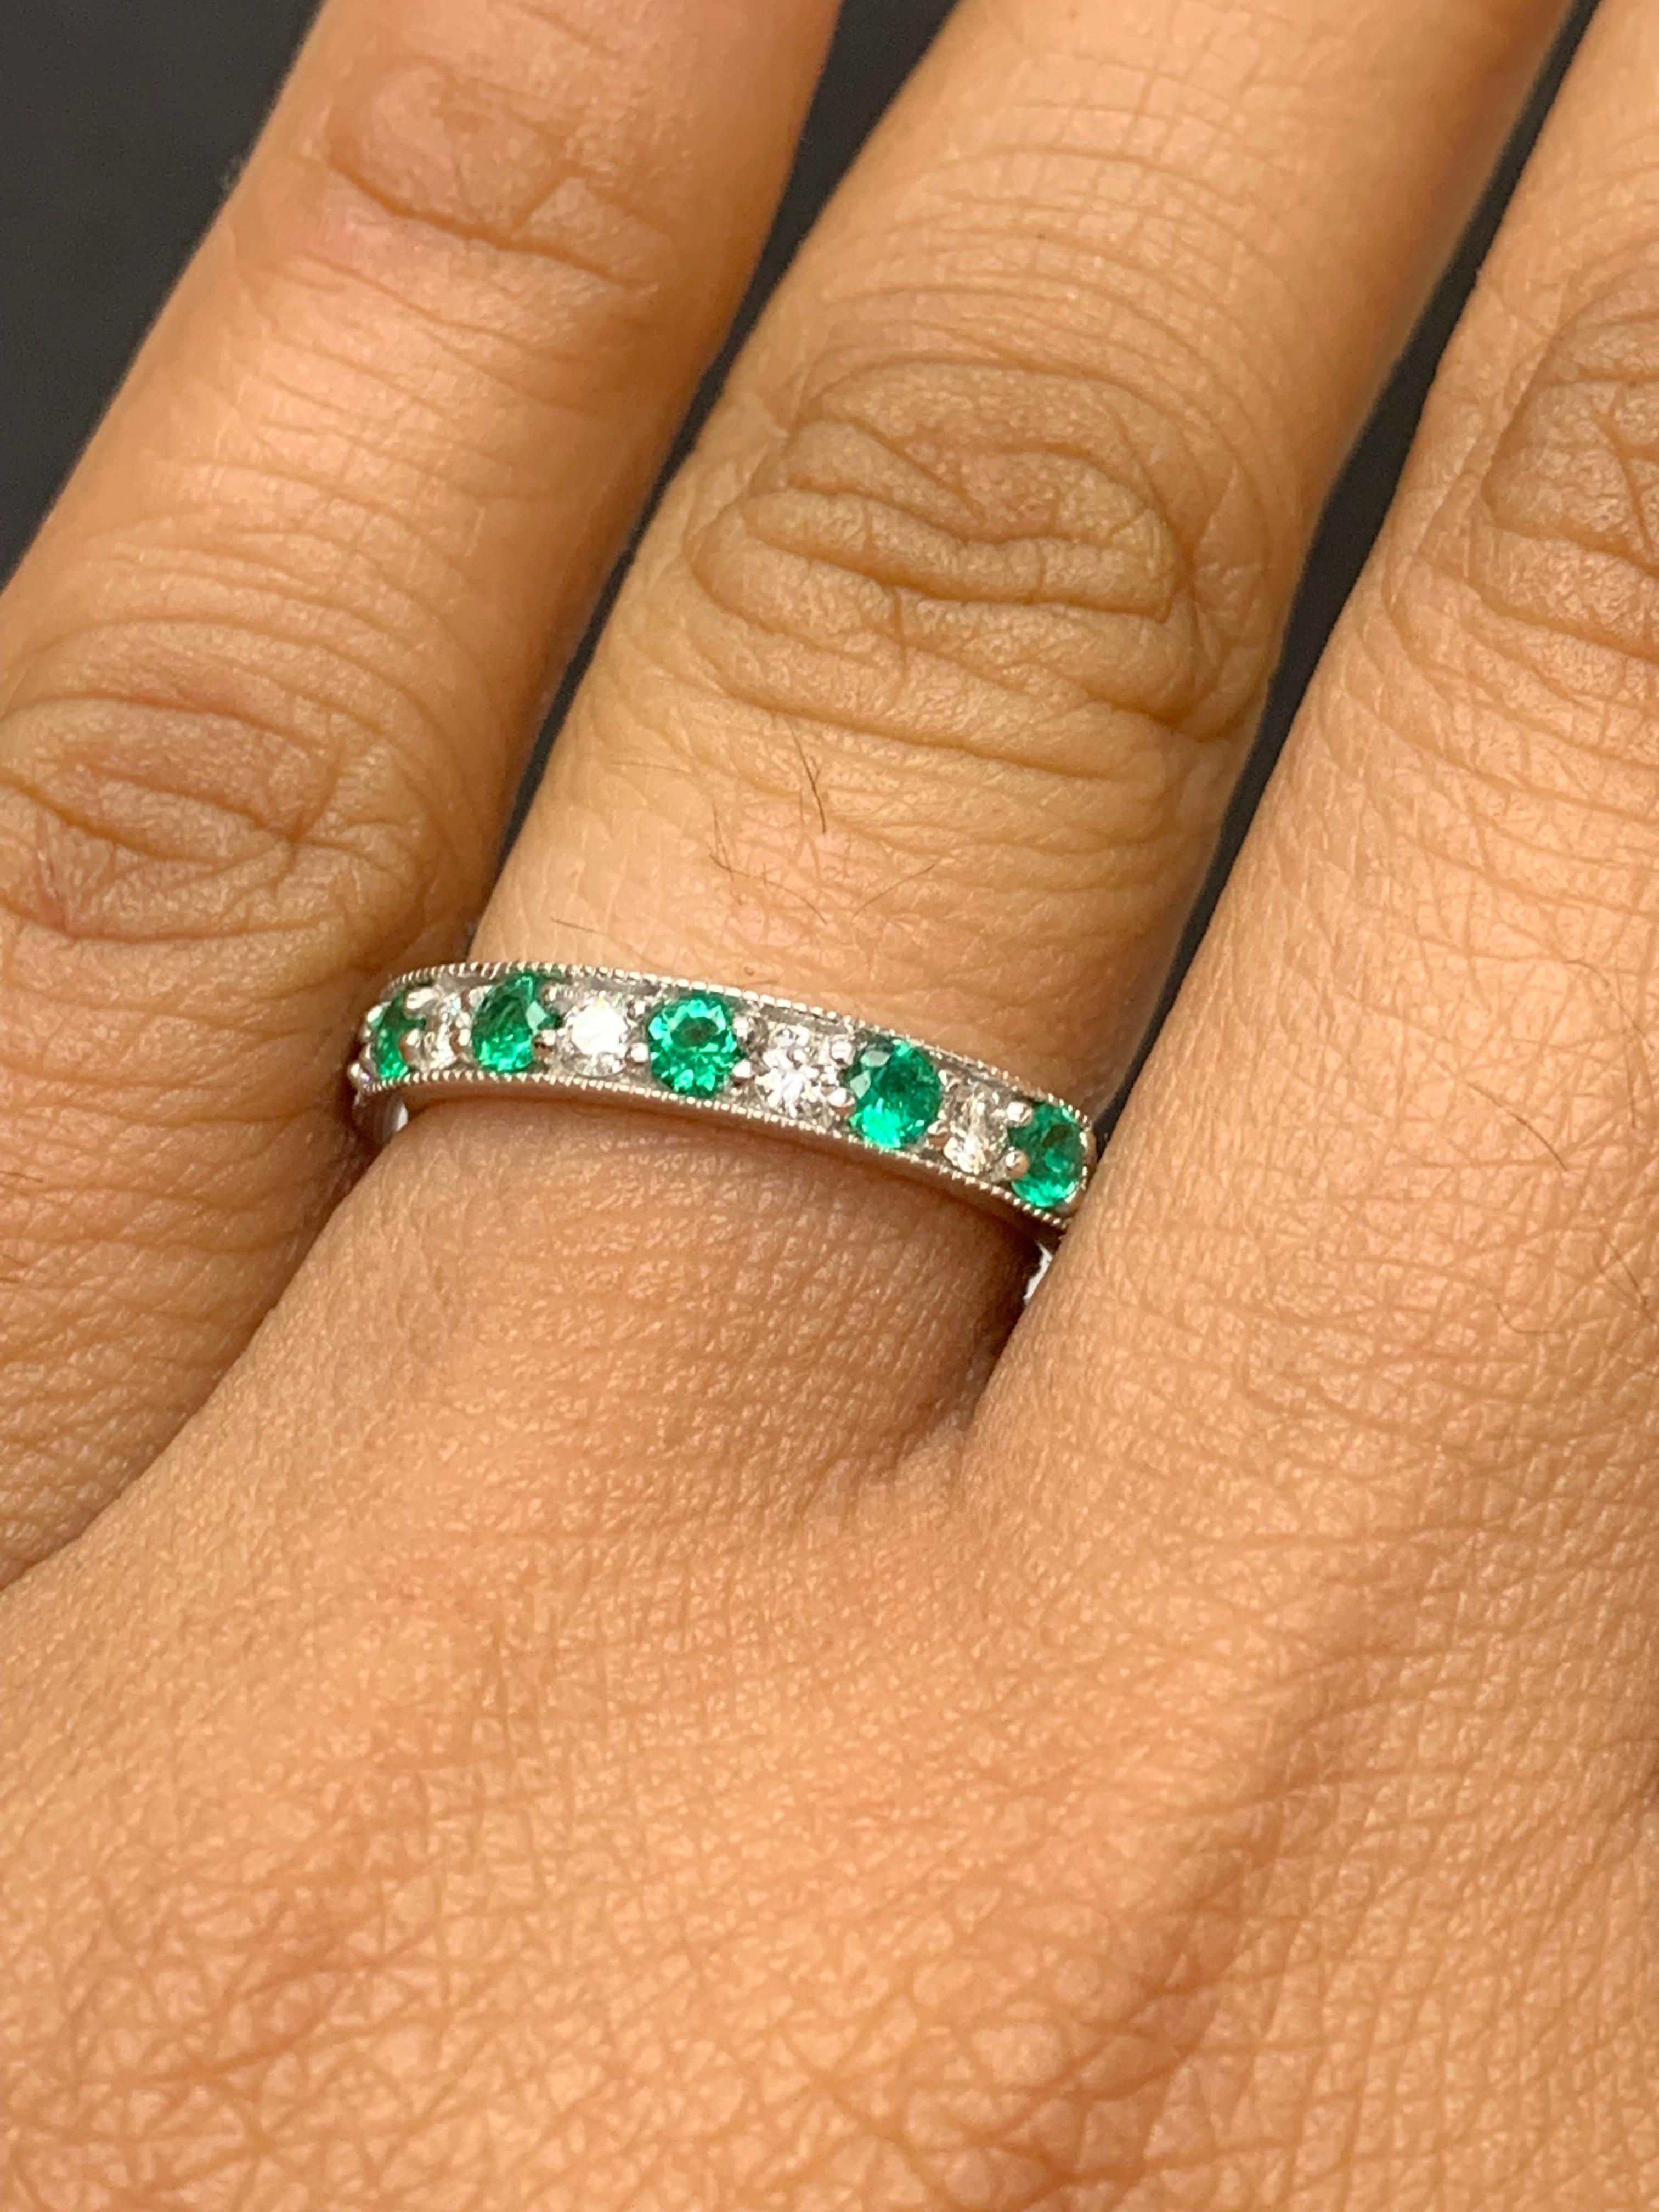 Handcrafted to perfection; showcasing color-rich brilliant-cut emeralds that elegantly alternate brilliant-cut diamonds in an 14k white gold setting. 
The 7 Emeralds weigh 0.58 carats total and 6 diamonds weigh 0.30 carats total.

Size 6.5 US